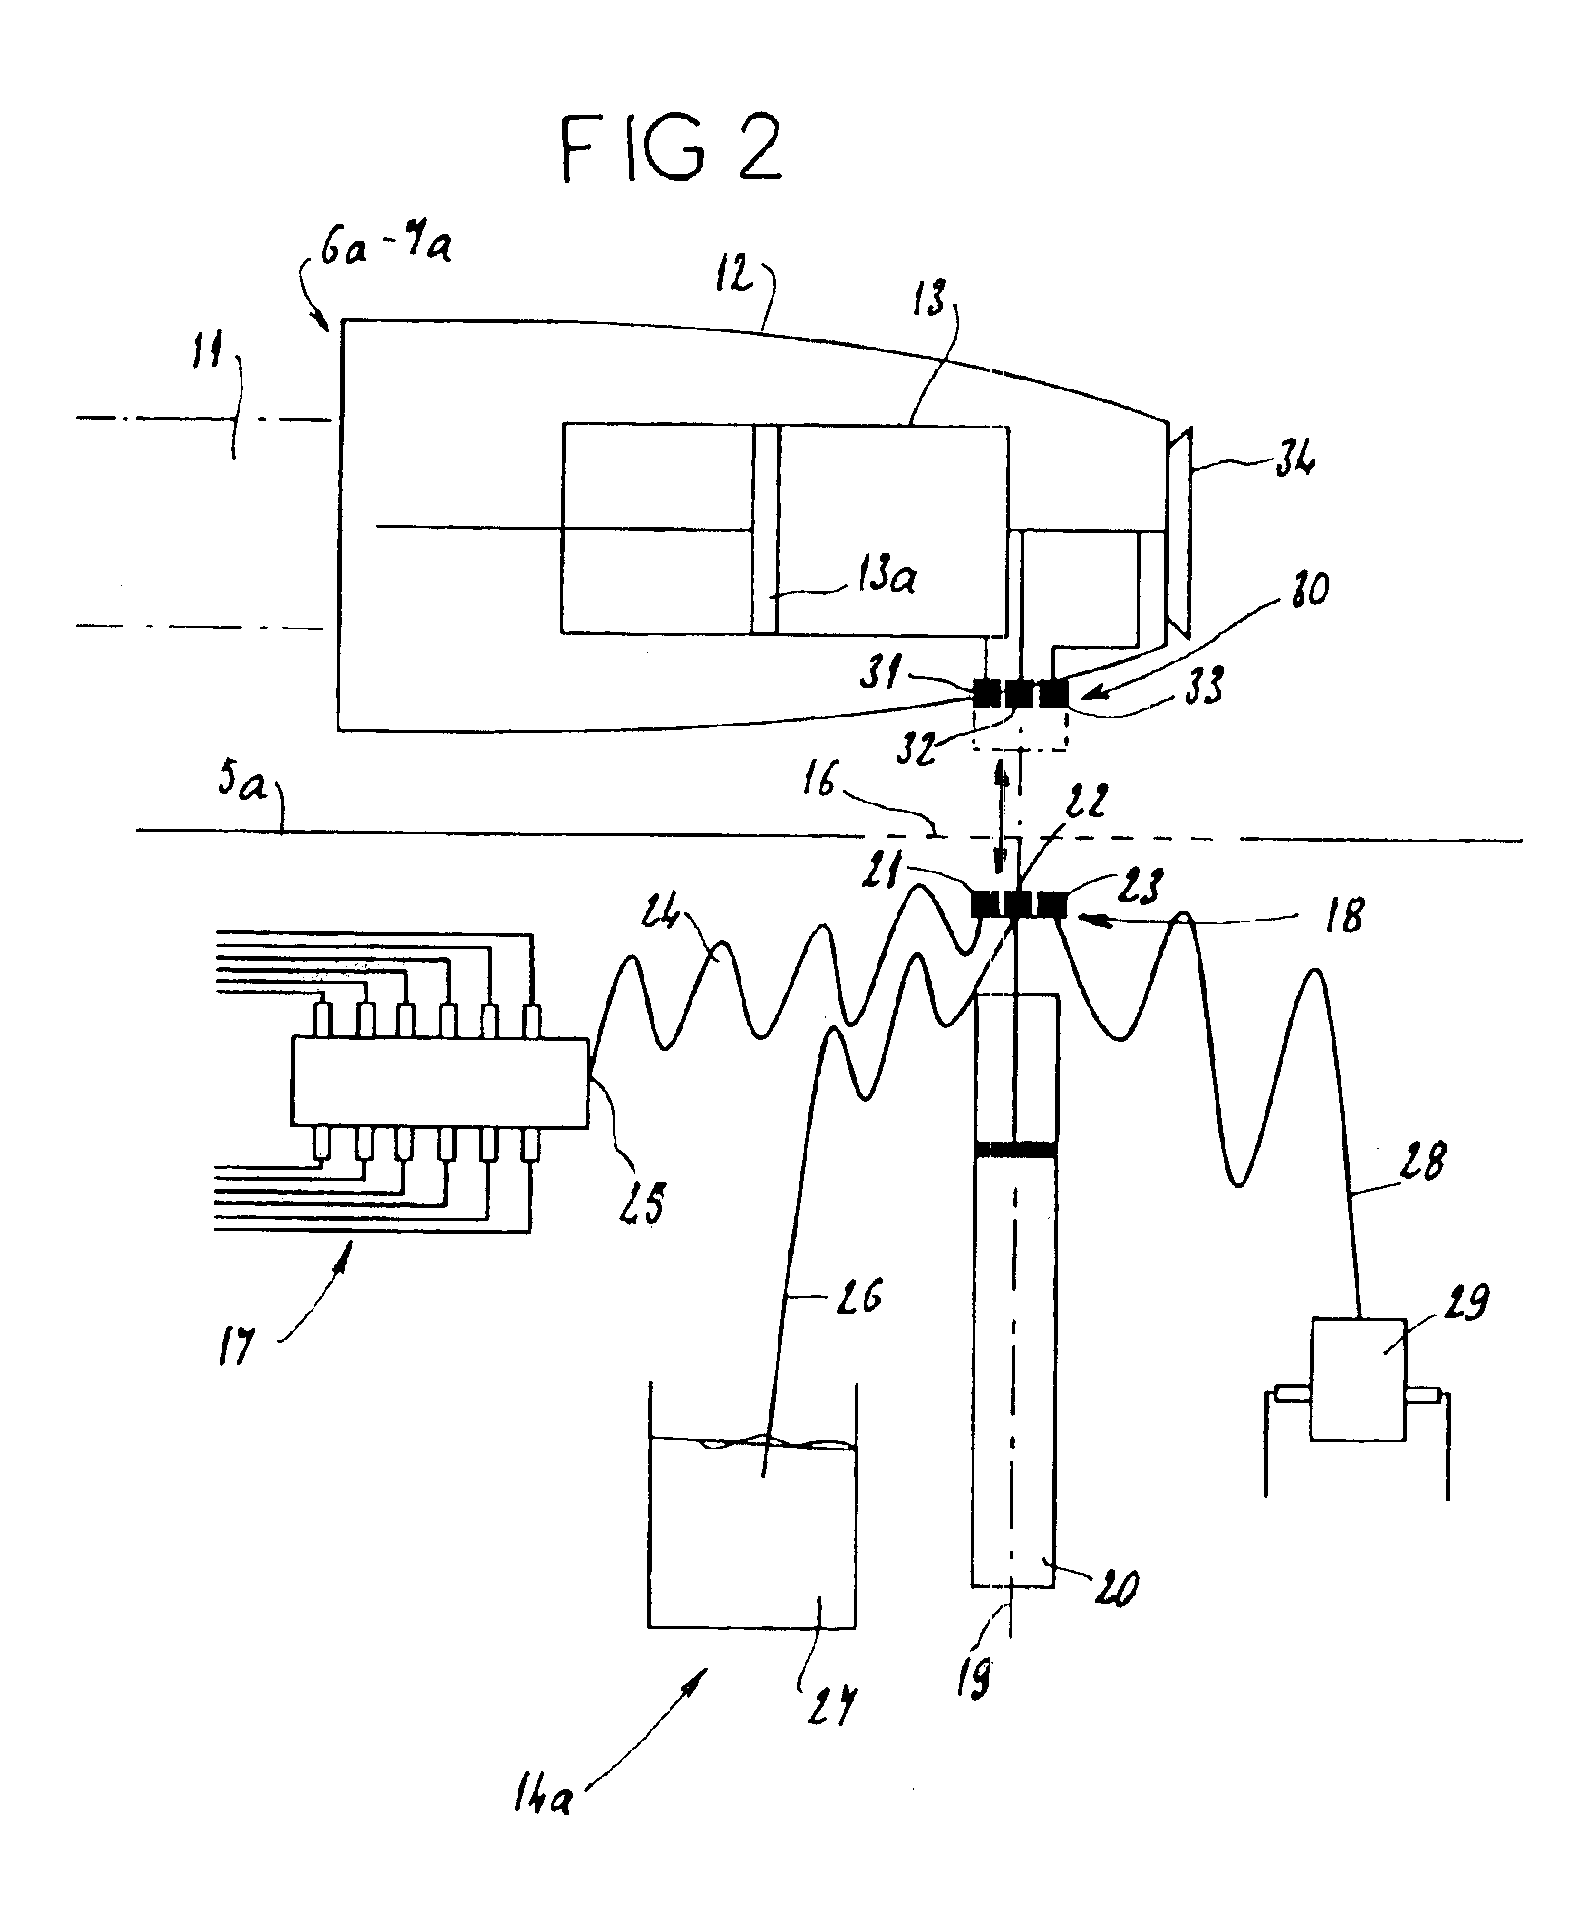 Method and device for filling a paint reservoir in an automated painting installation